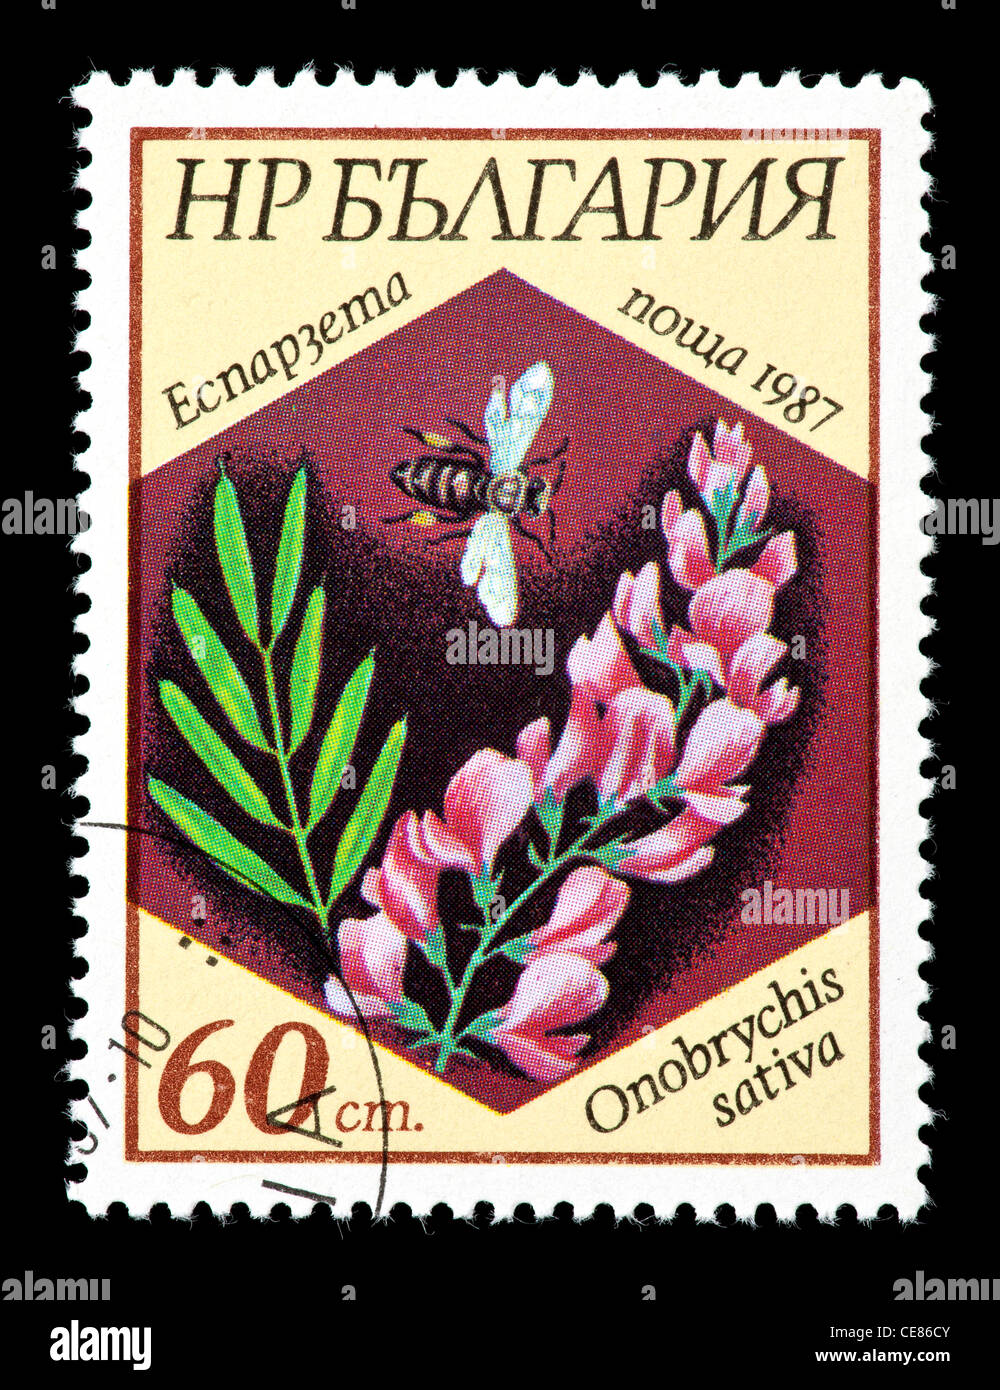 Postage stamp from Bulgaria depicting a bee and a flower (Onobrychis sativa). Stock Photo